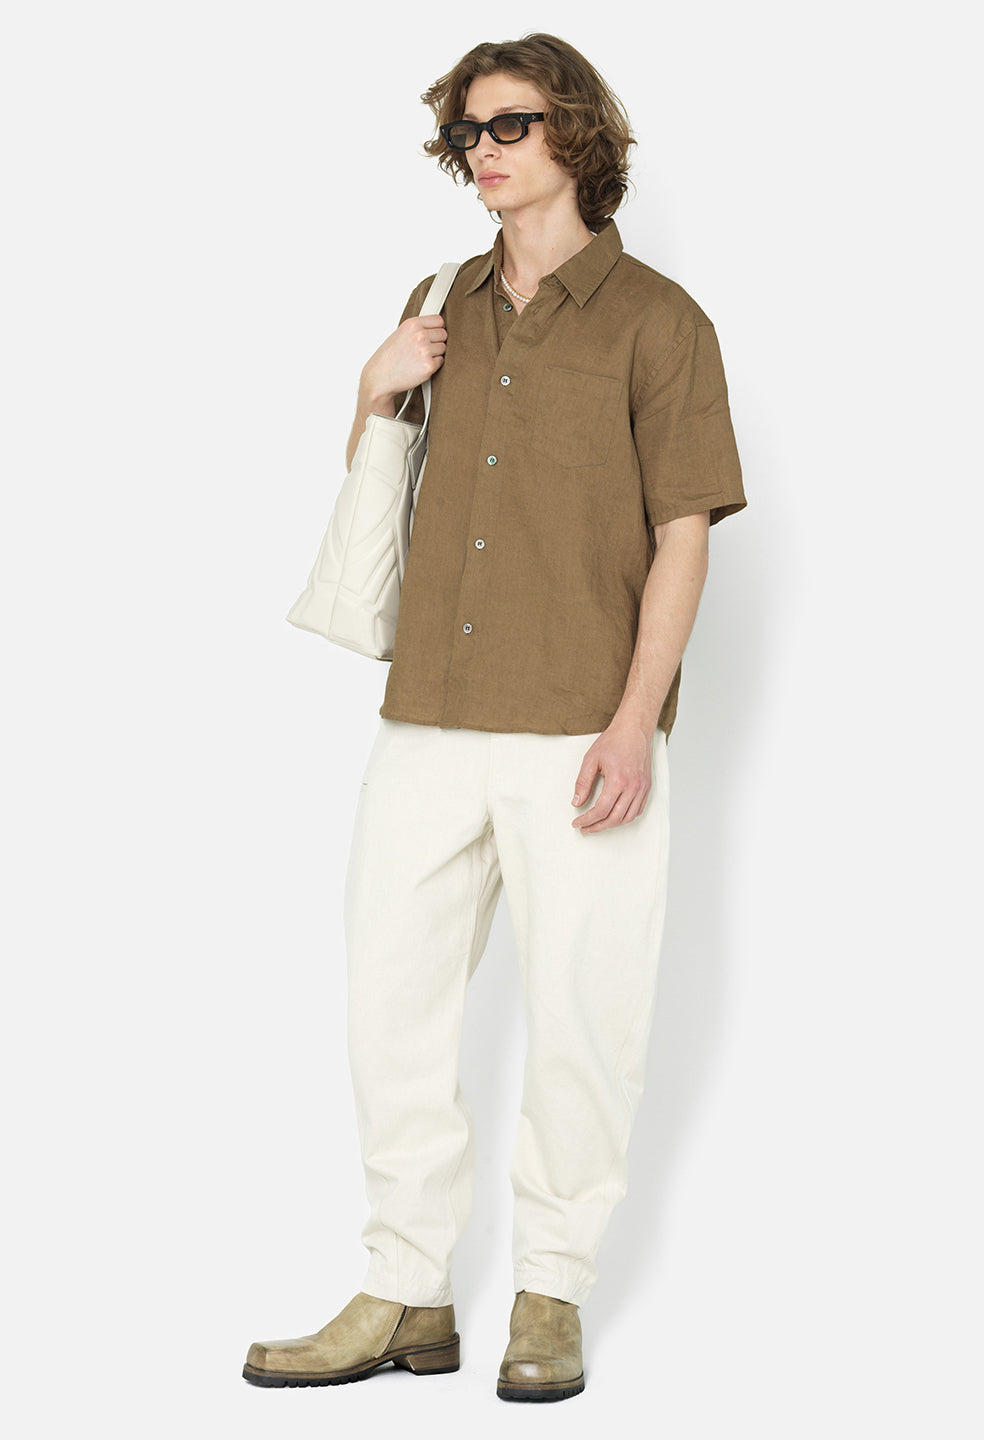 Statement White Shirt and Green Trousers Set for Women